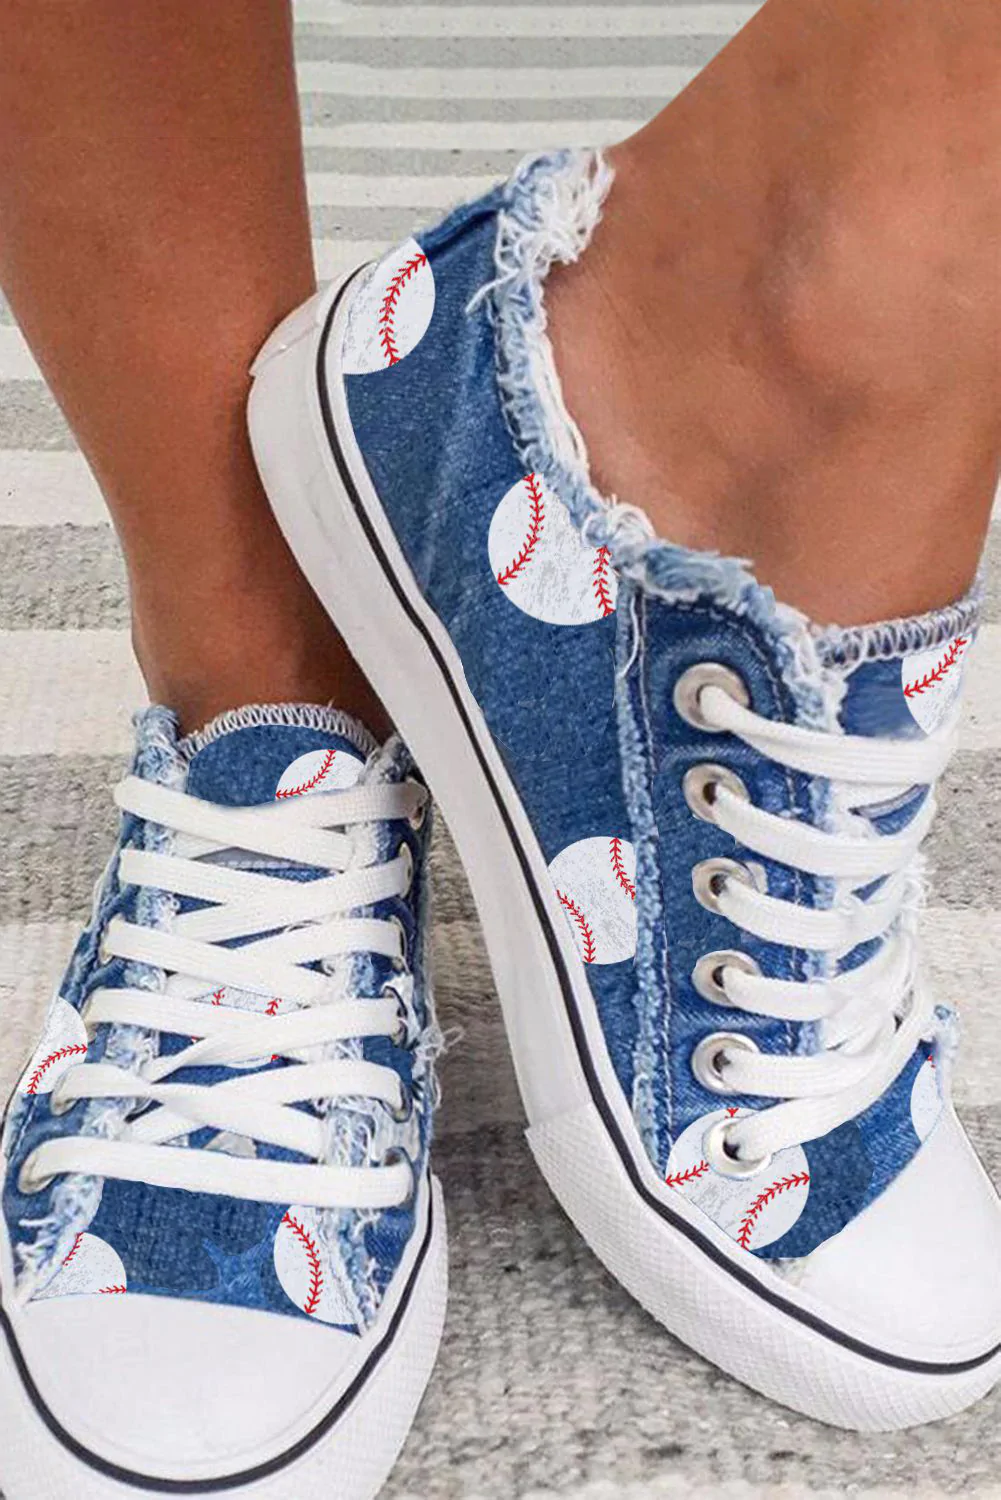 Baseball Printed Denim Color Casual Lace Up Canvas Shoes Sneakers